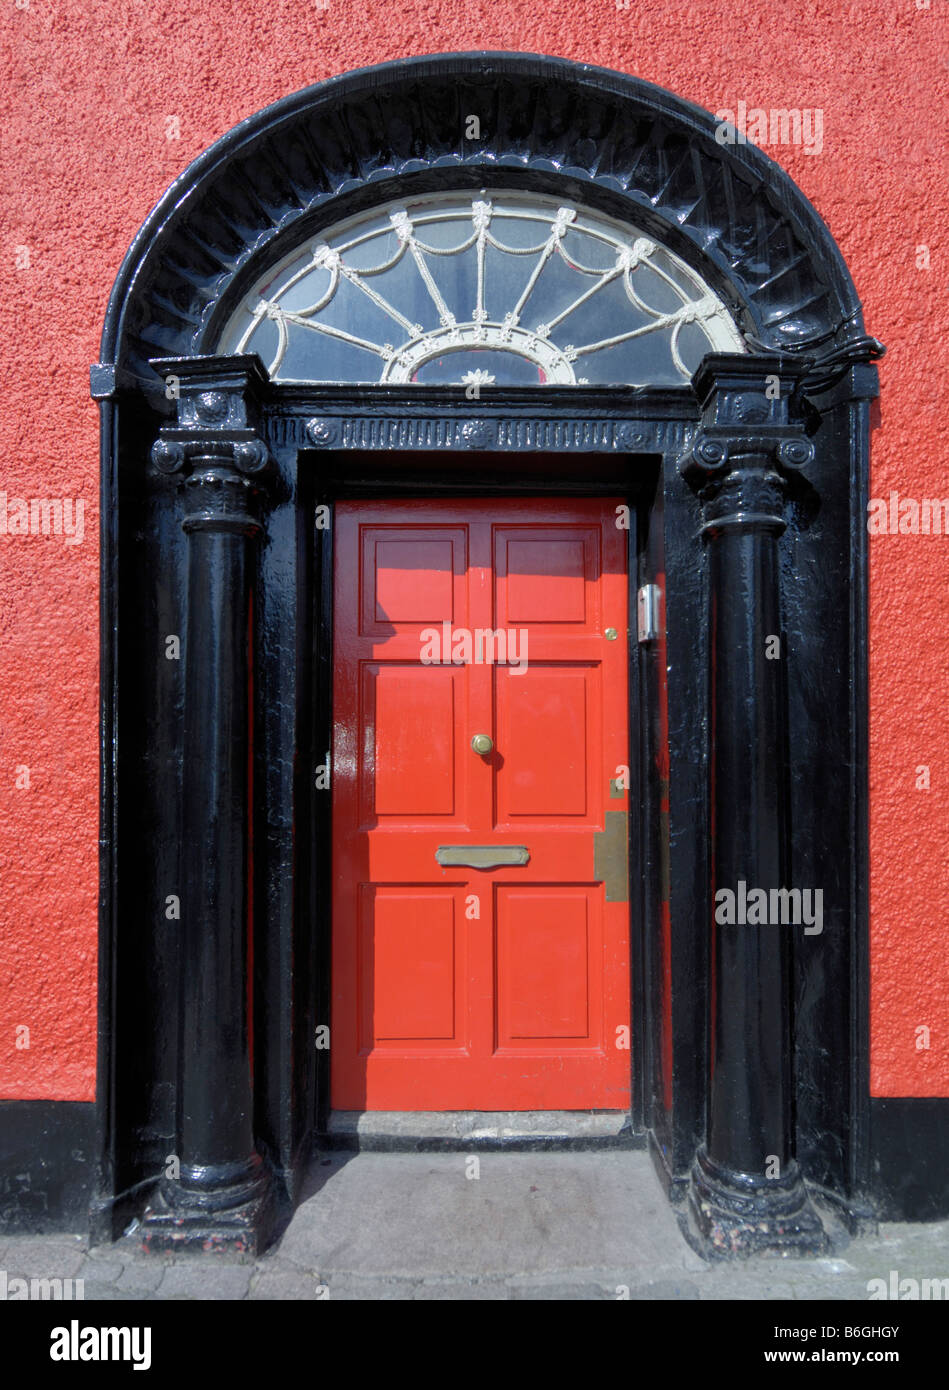 Red door entrance arched Stock Photo